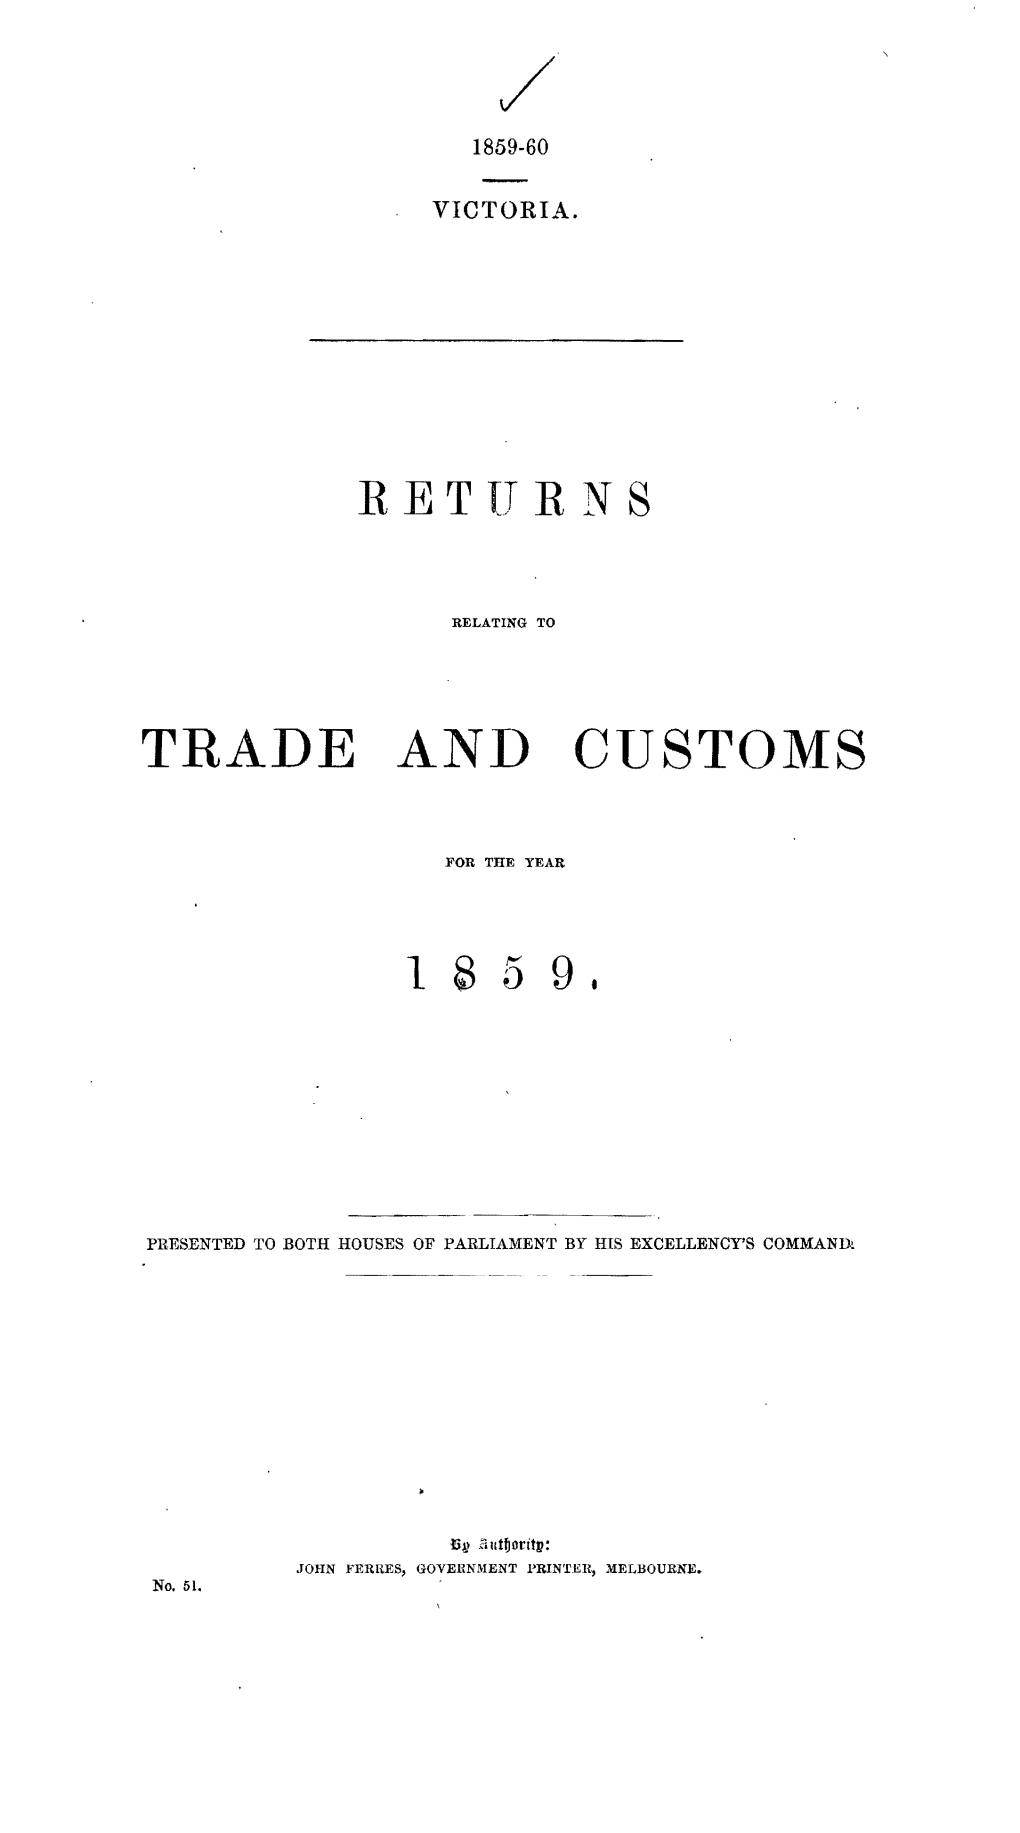 Trade and Customs